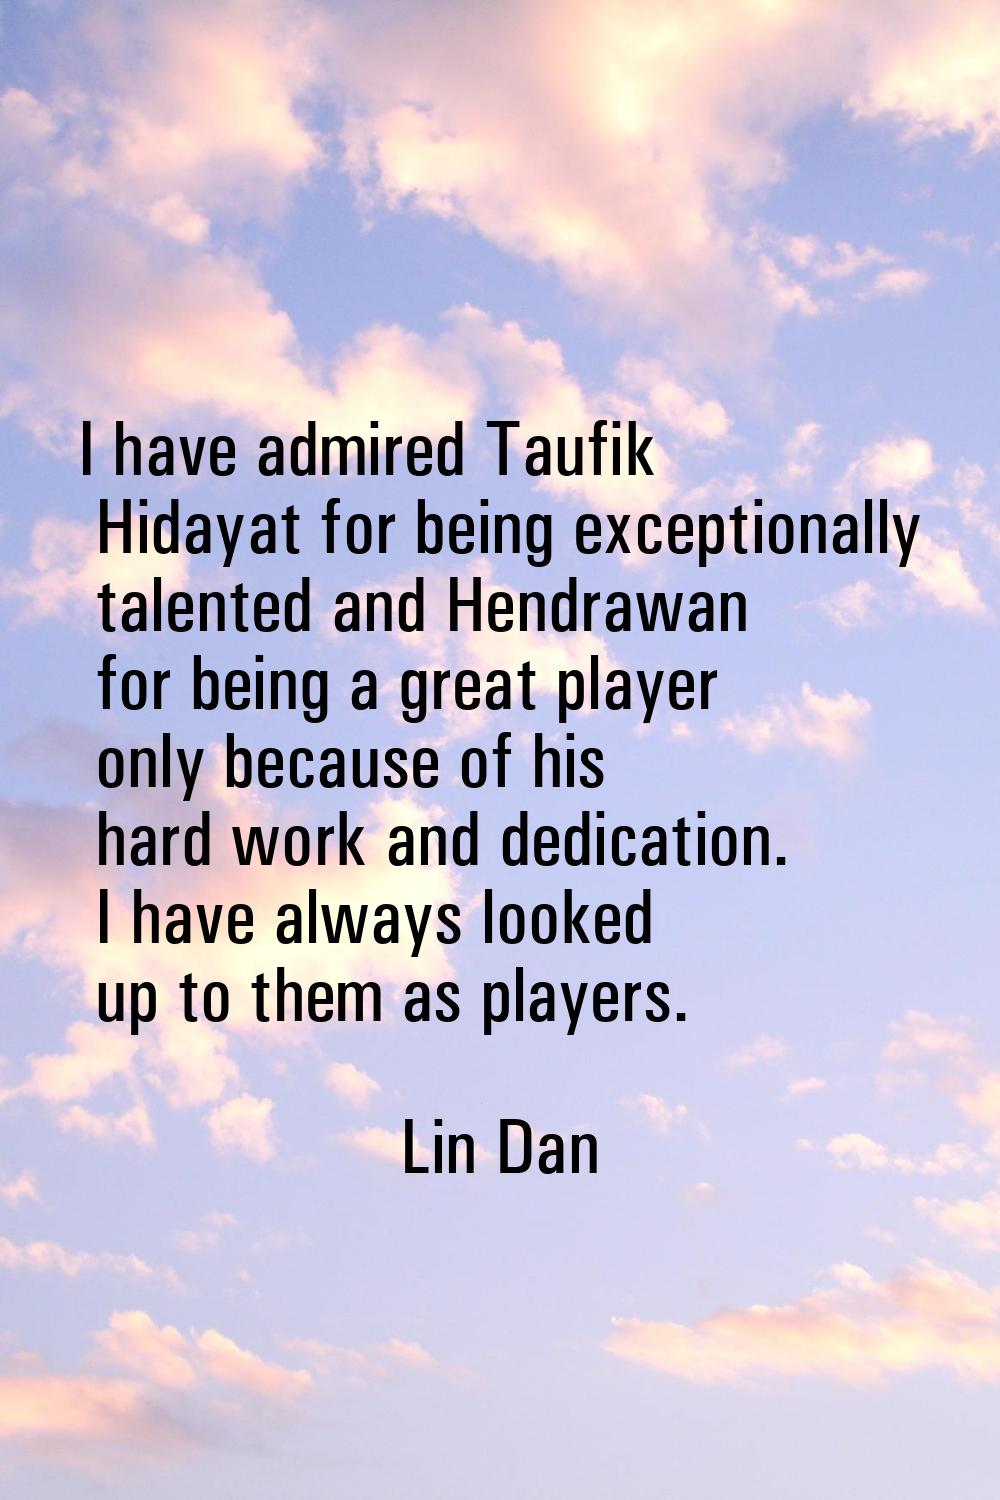 I have admired Taufik Hidayat for being exceptionally talented and Hendrawan for being a great play